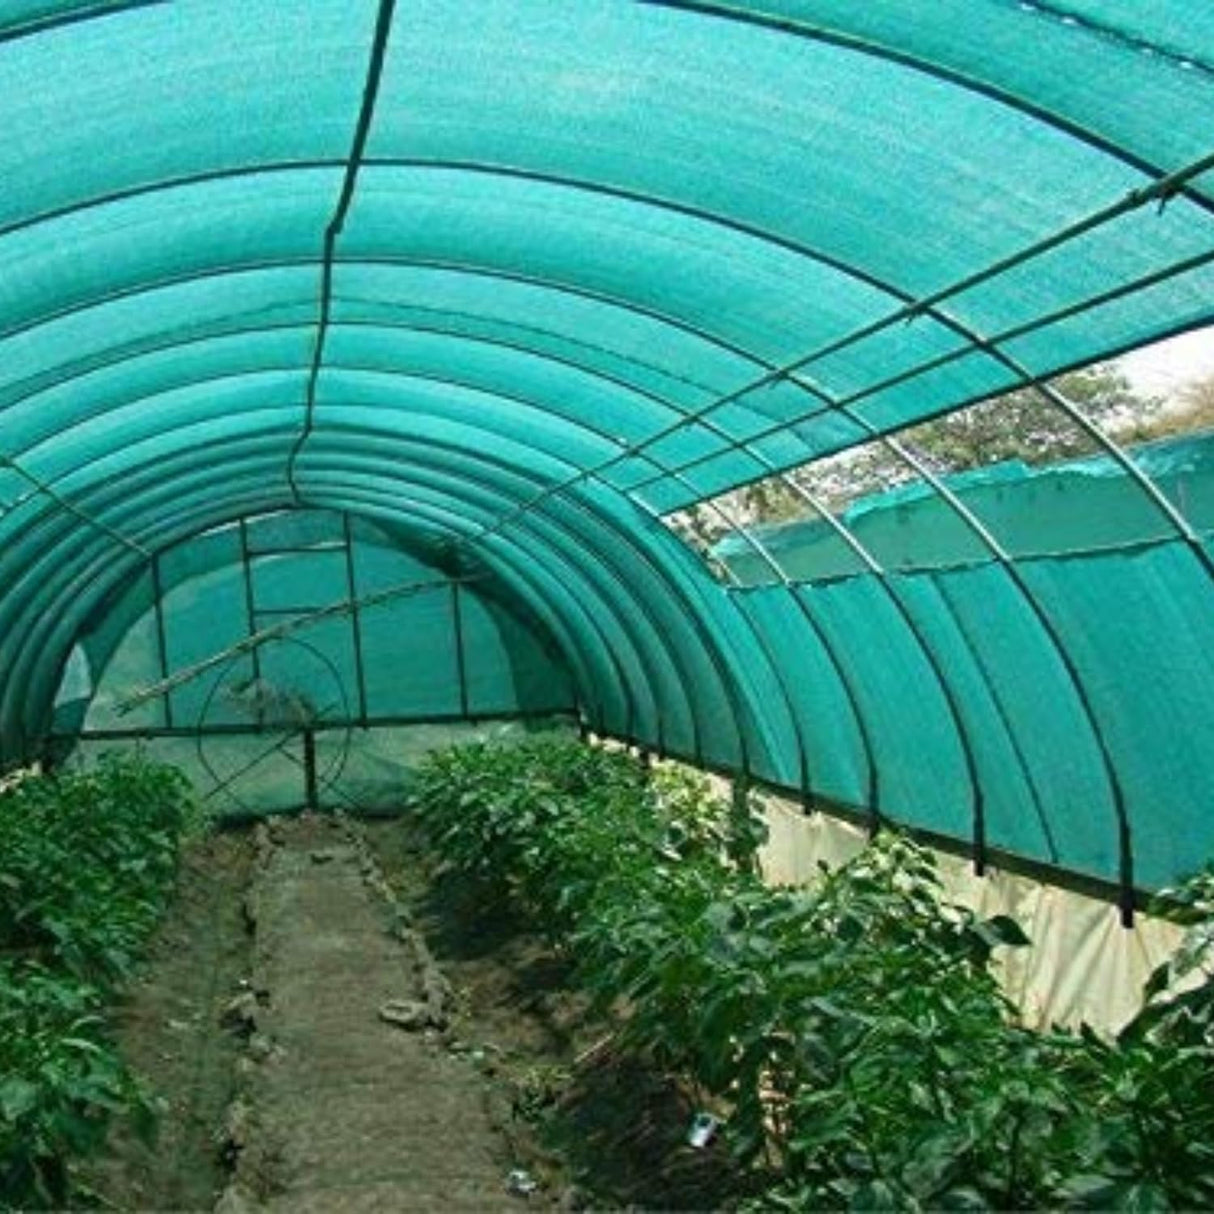 Singhal HDPE Nets Green Shade Net 50% UV Protected 3 Meter x 25 Meter for Floriculture, Ornamental Plants, Gardening Multipurpose with Attached Eyelets on Every Meter